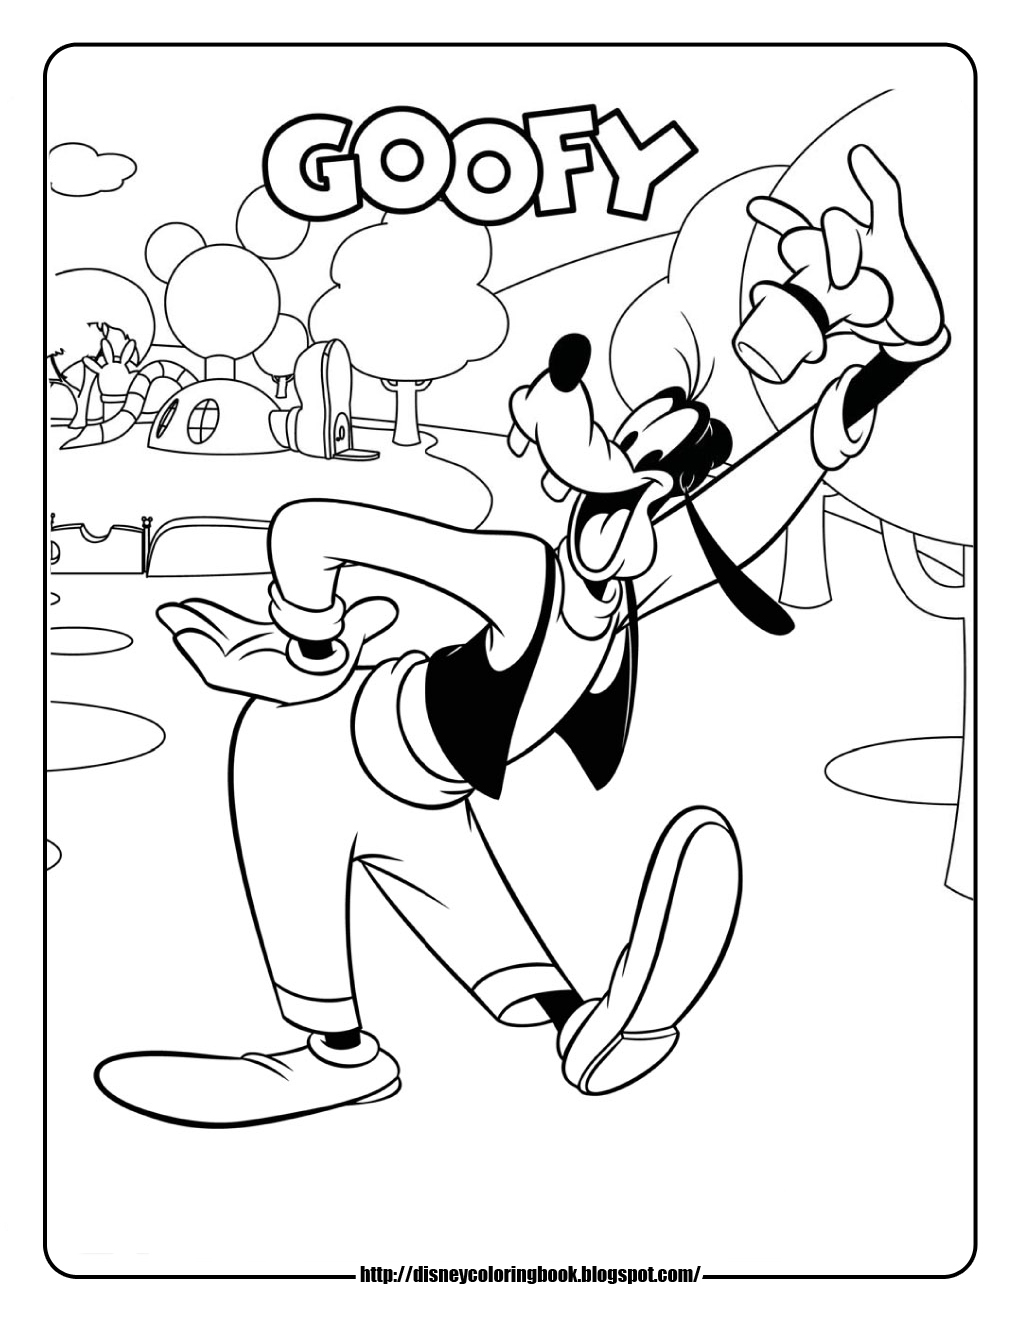 Download Disney Coloring Pages and Sheets for Kids: Mickey Mouse Clubhouse 2: Free Disney Coloring Sheets